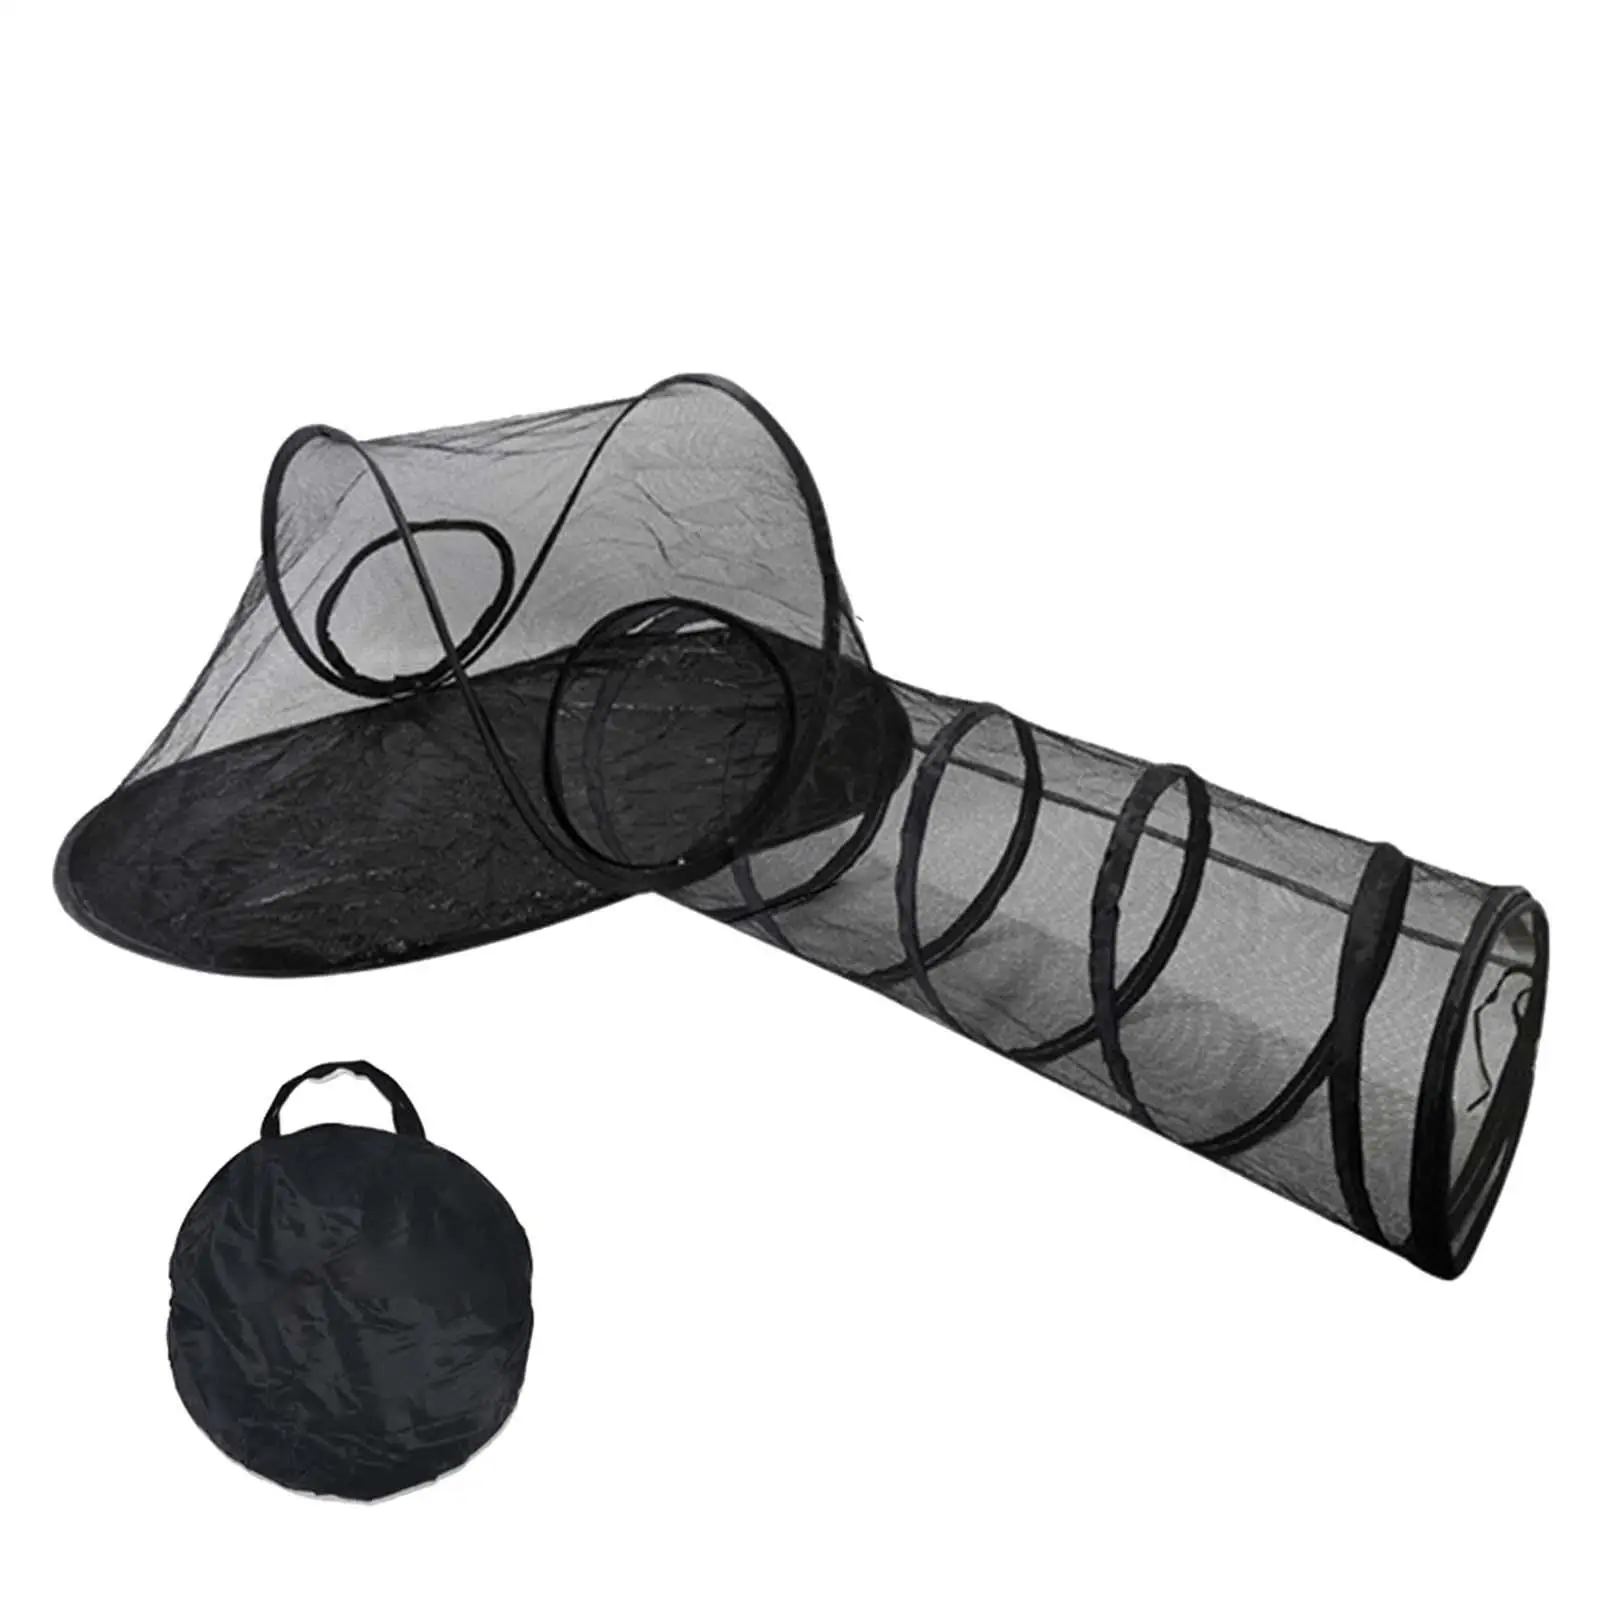 Cat Tent and Tunnel Portable Collapsible with Carry Bag Puppy Playhouse for Small Animals Kitten Indoor Cats Rabbits Backyard